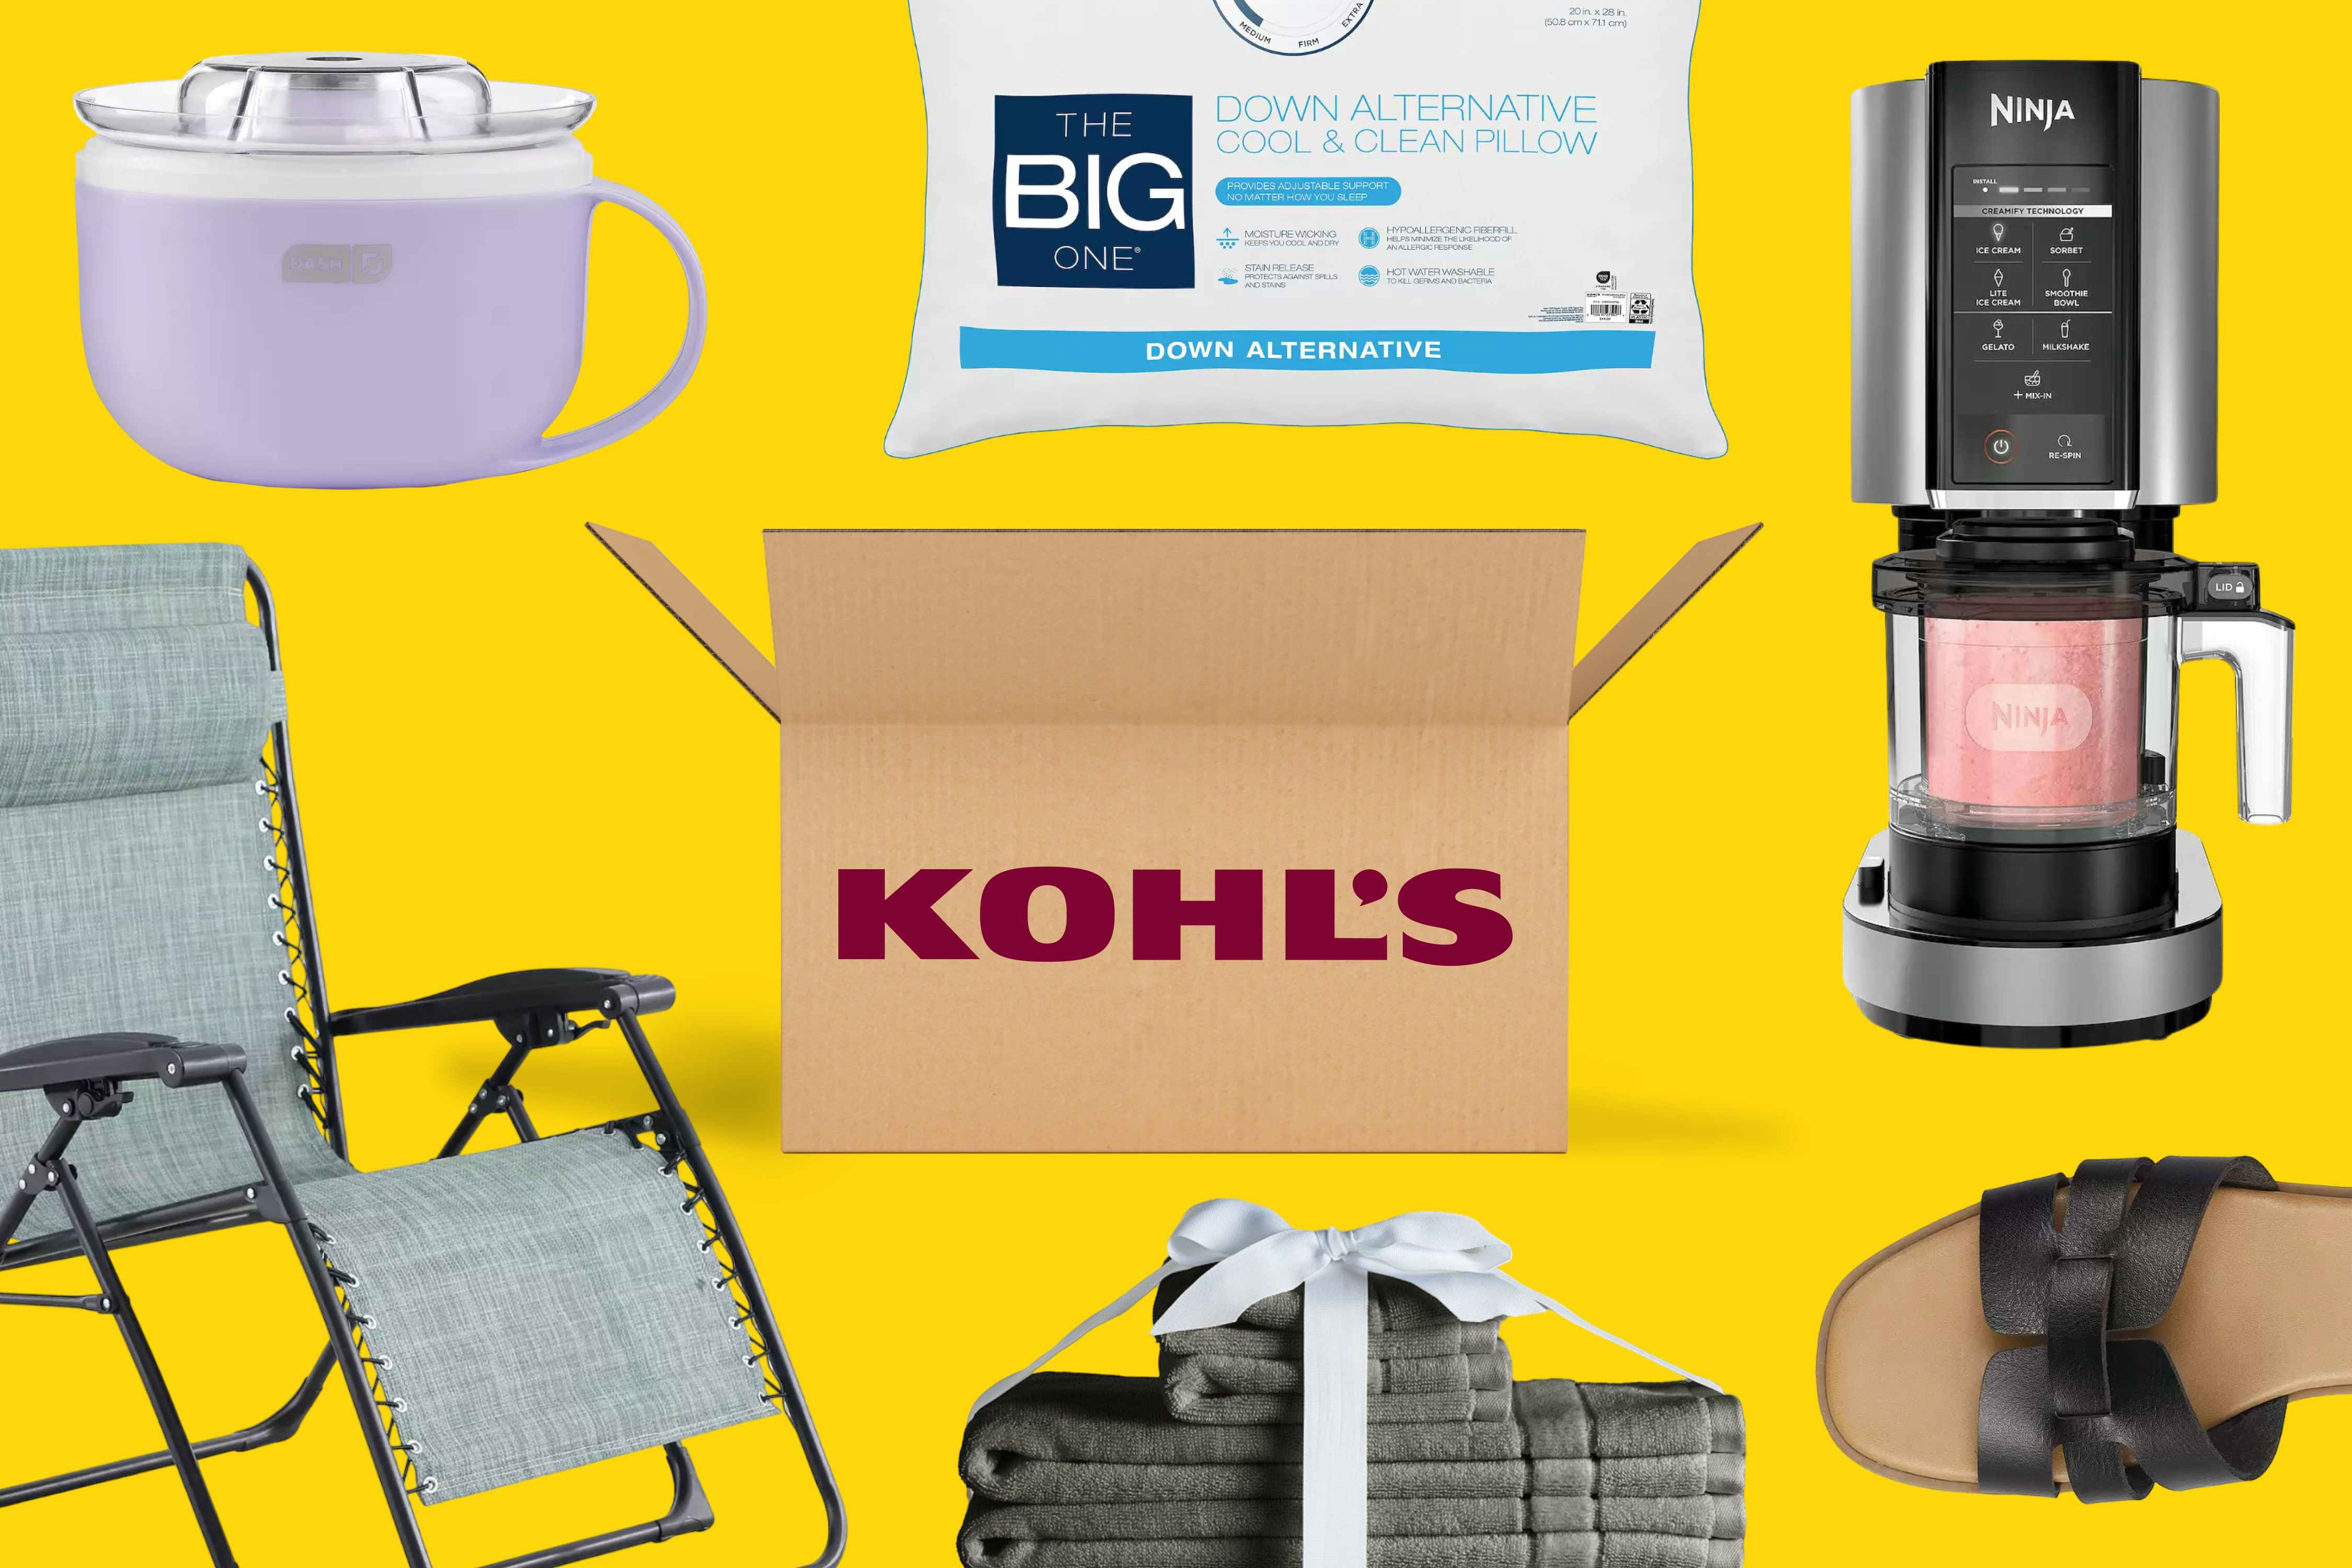 Kohl's Mystery Day: $6 Mini Waffle Maker, $13 Comforter, and $7 Beach Towels